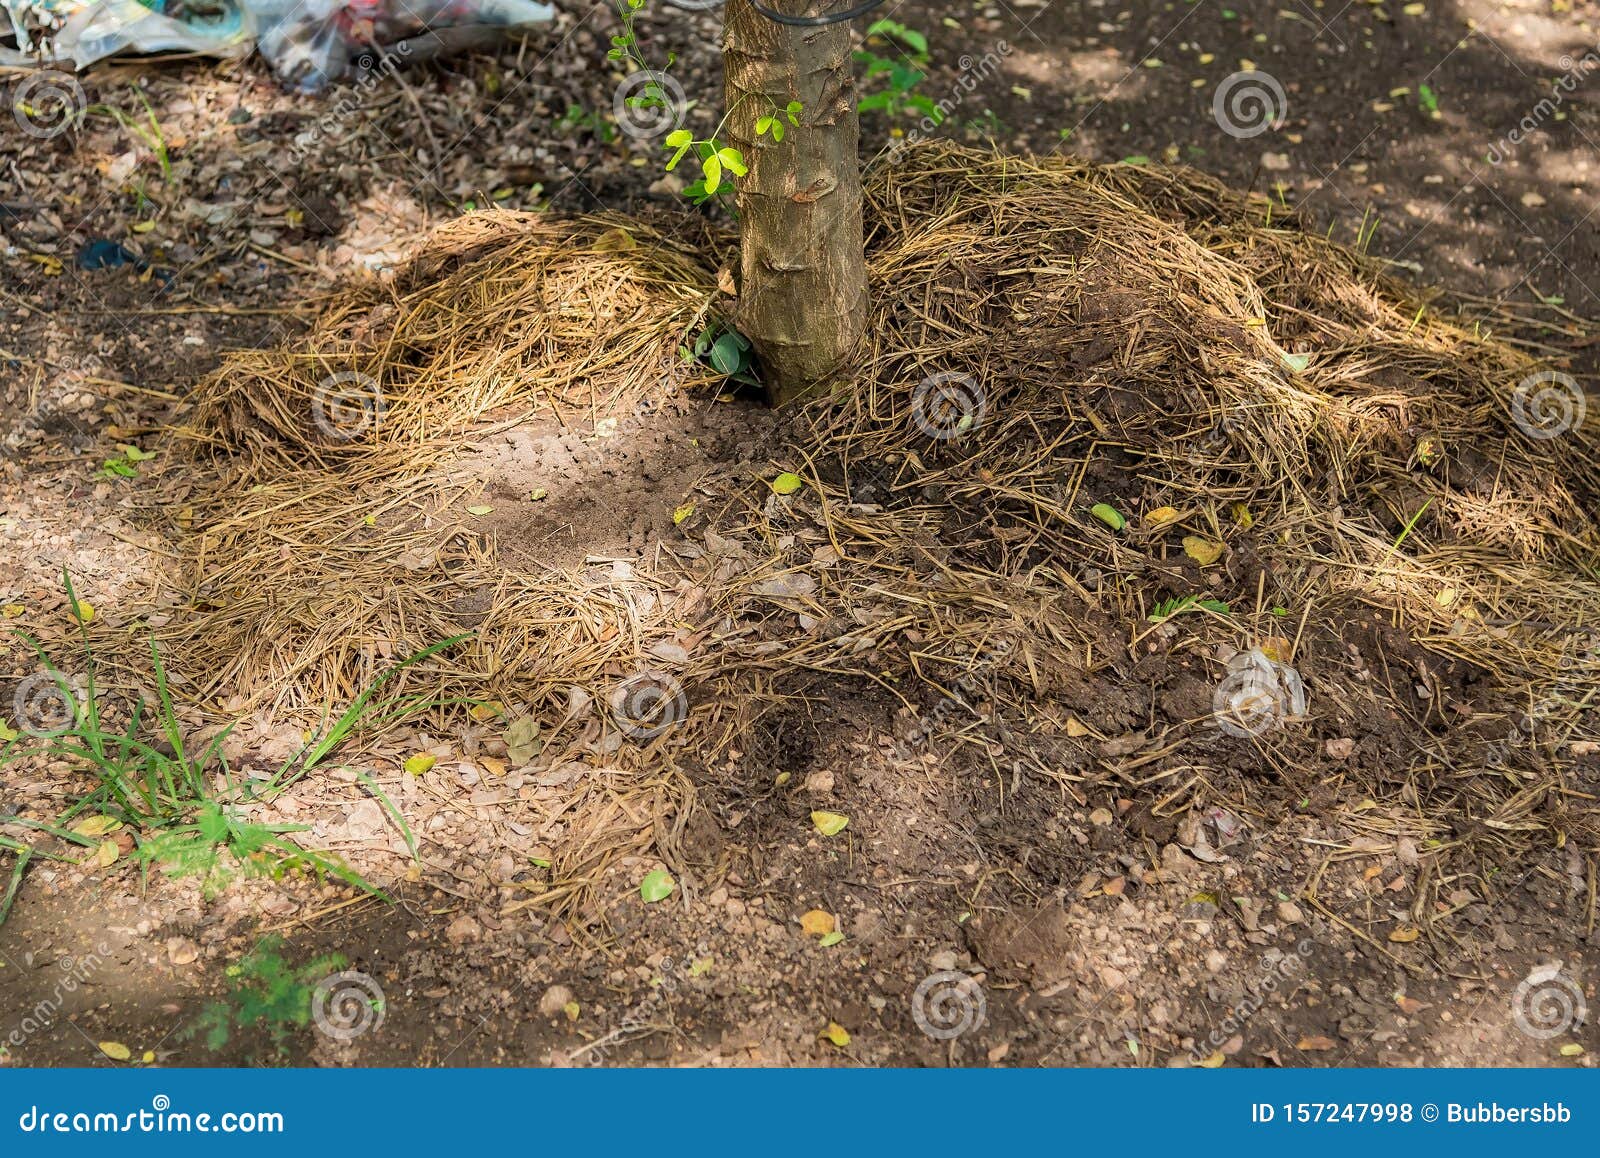 Manure From Cow Dung Under The Tree Stock Photo Image Of Image